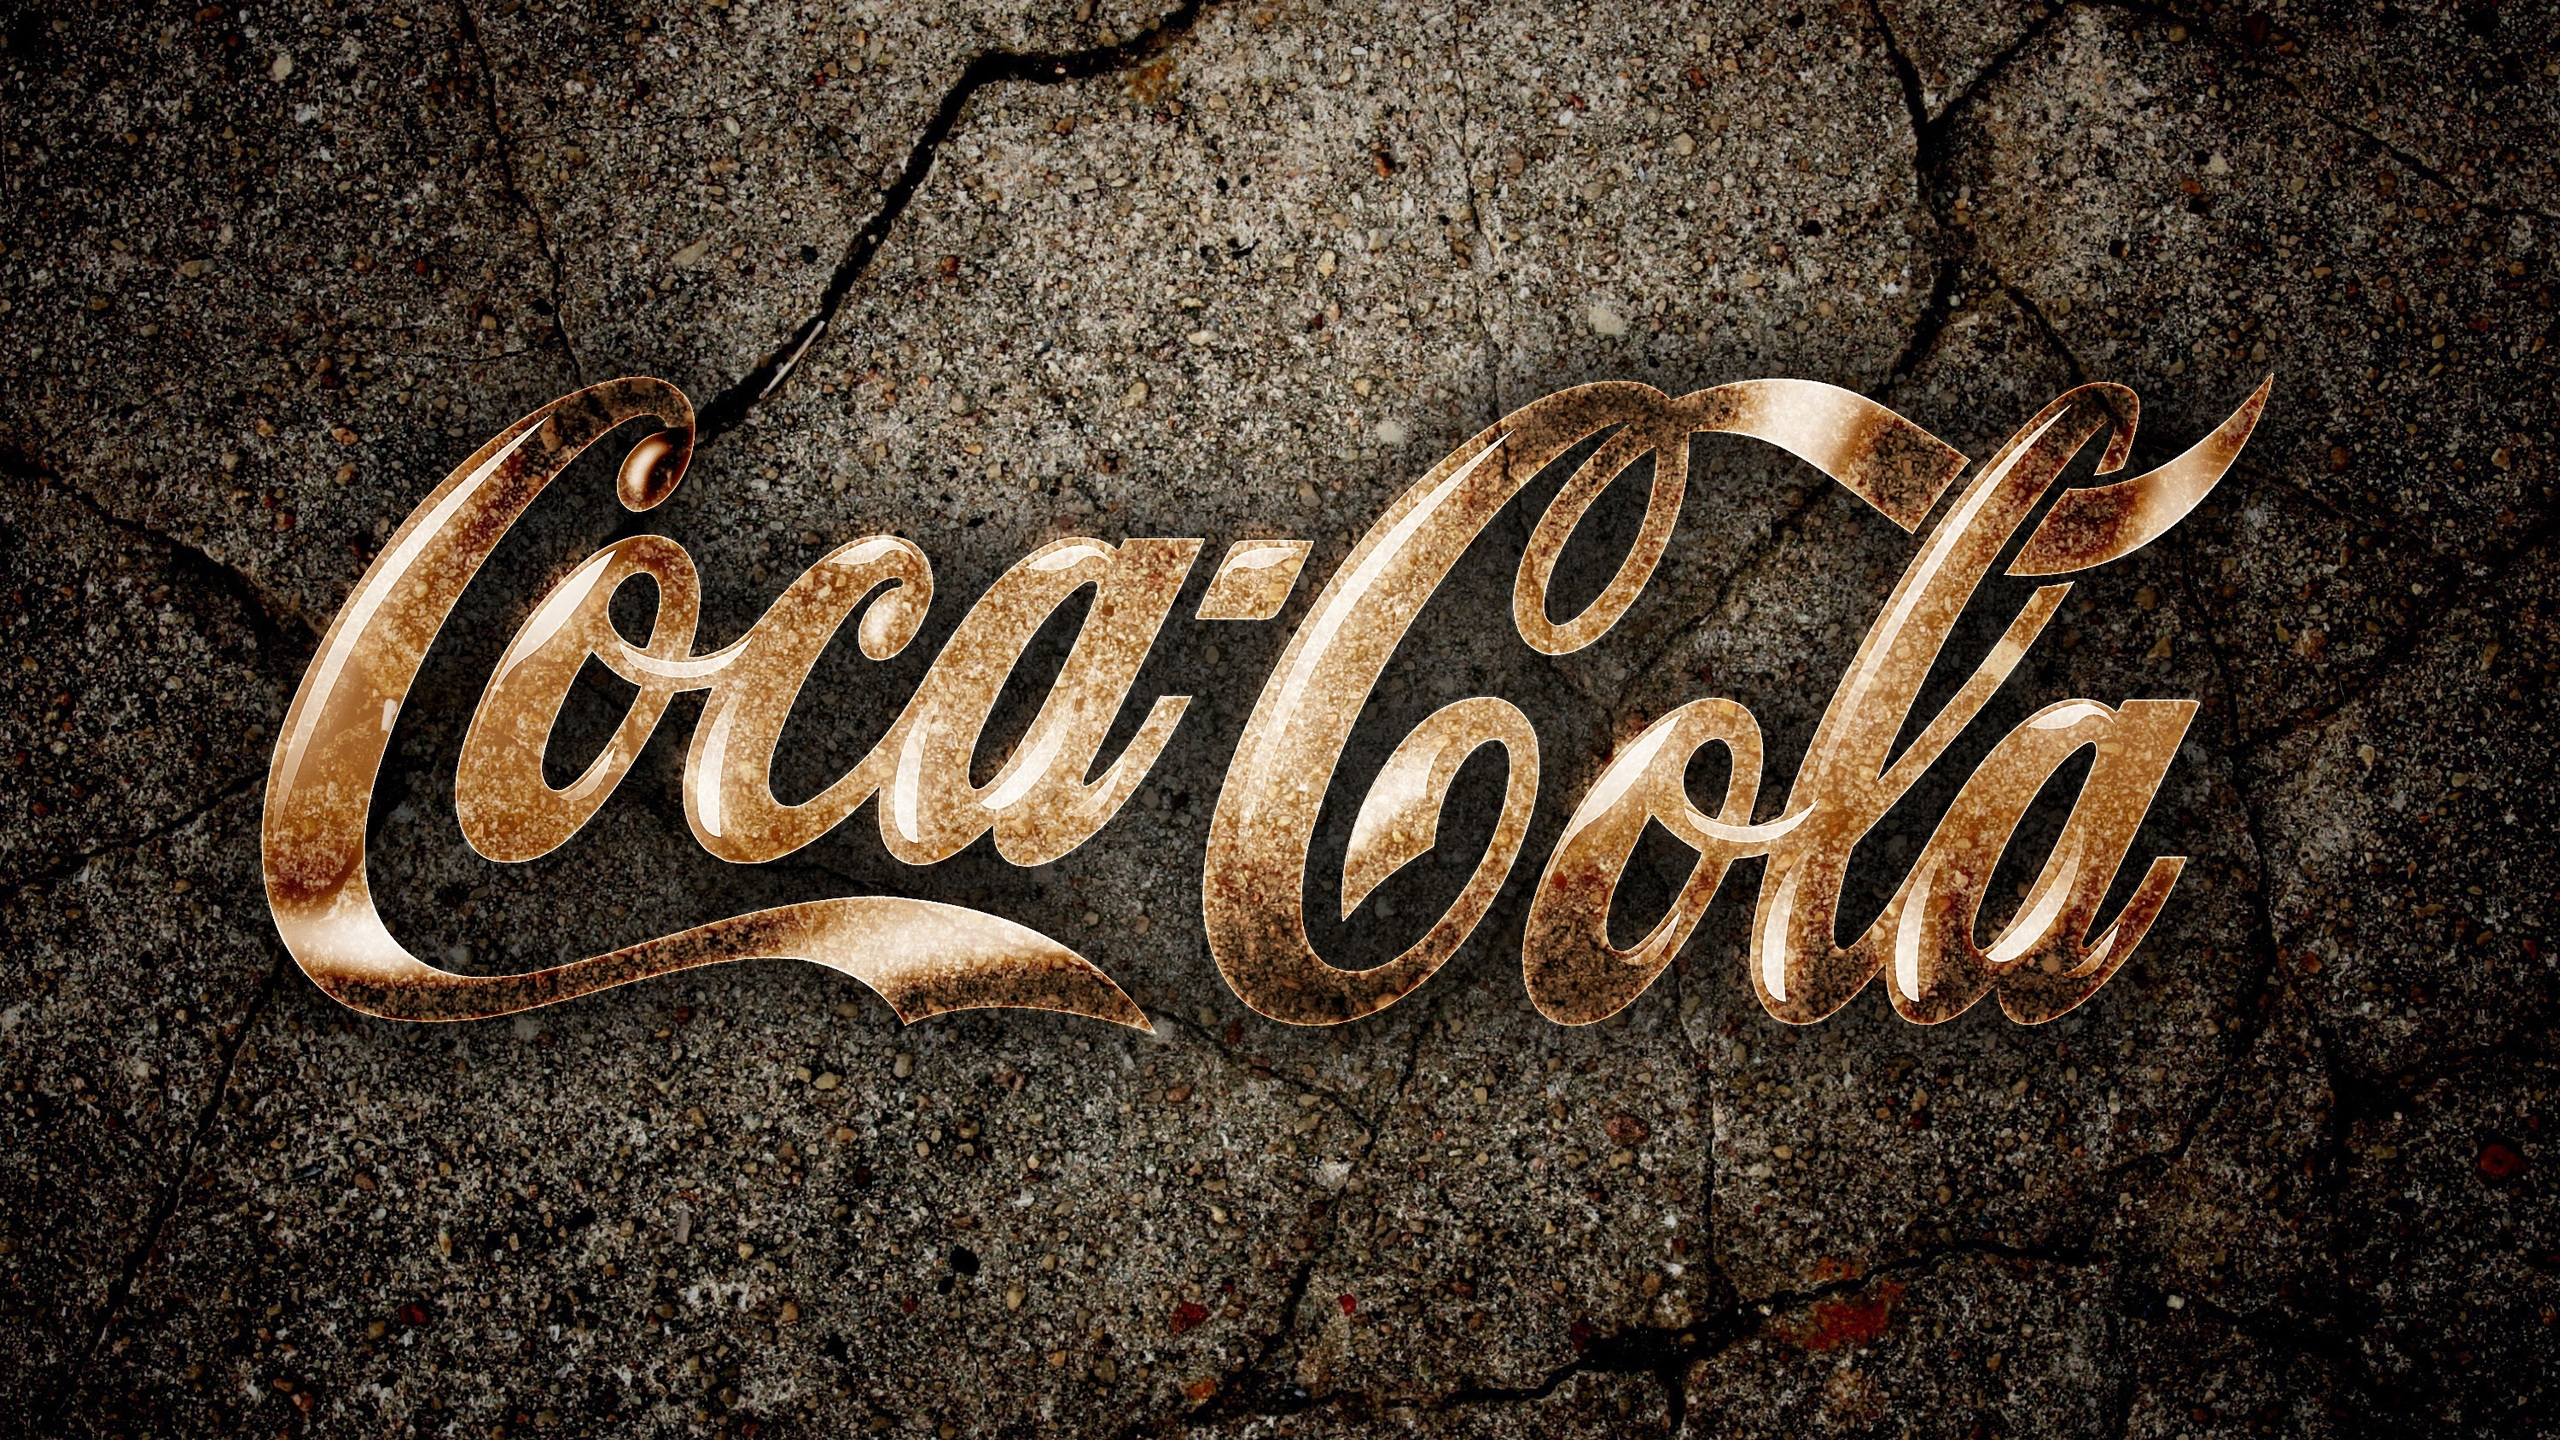 CocaCola Logo for 2560x1440 HDTV resolution